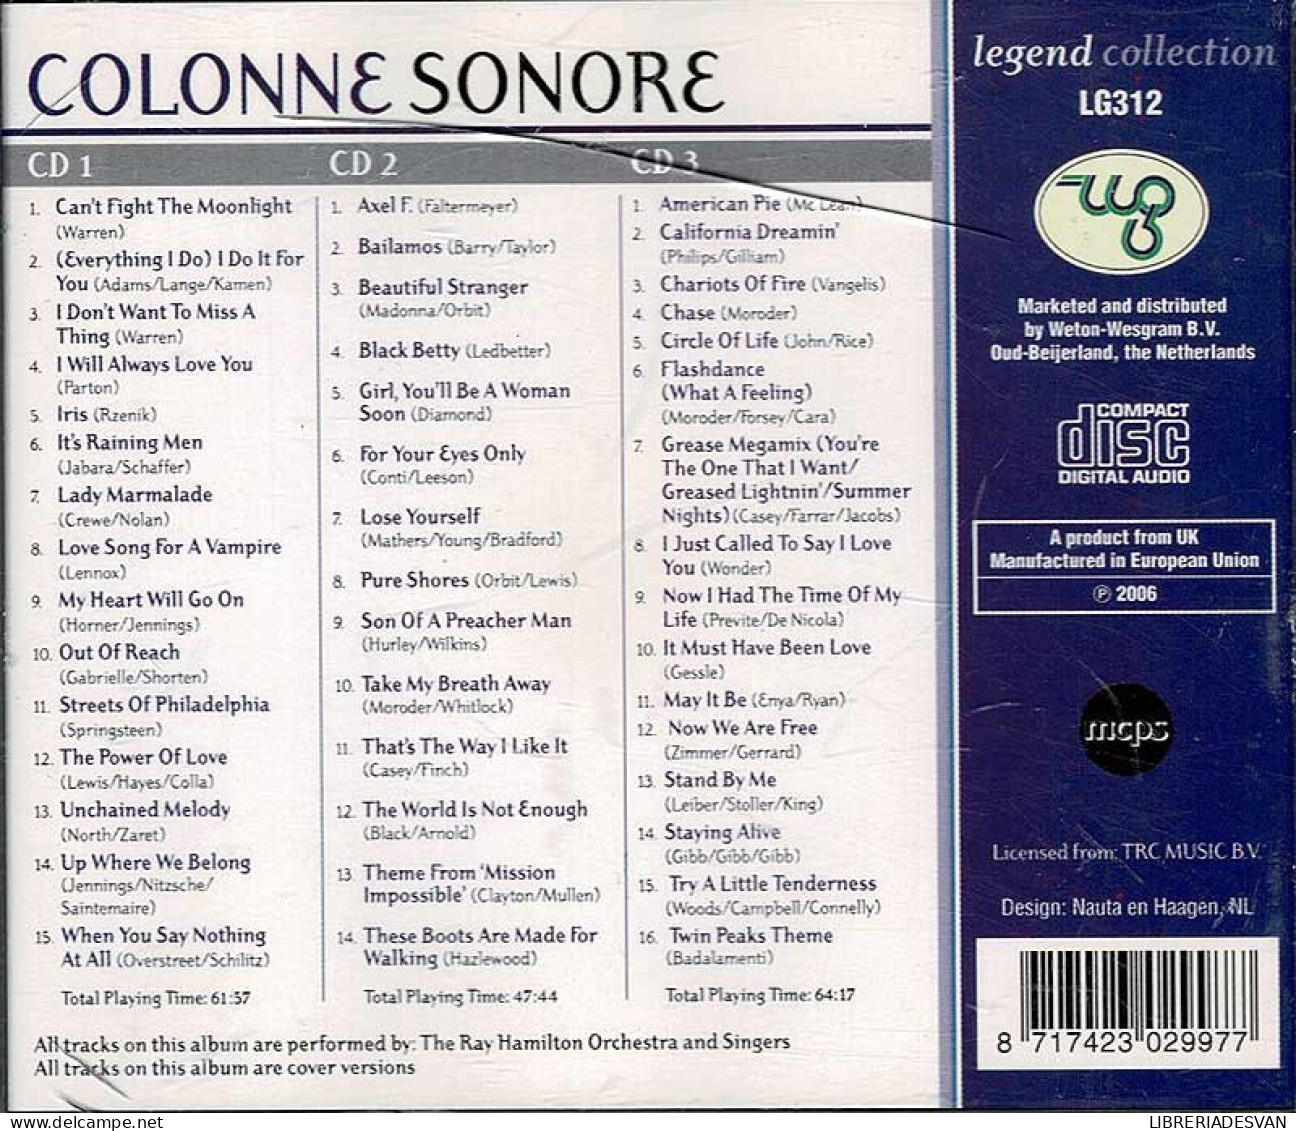 Ray Hamilton Orchestra & Singers - Colonne Sonore Legend Collection. 3 X CD - Filmmusik